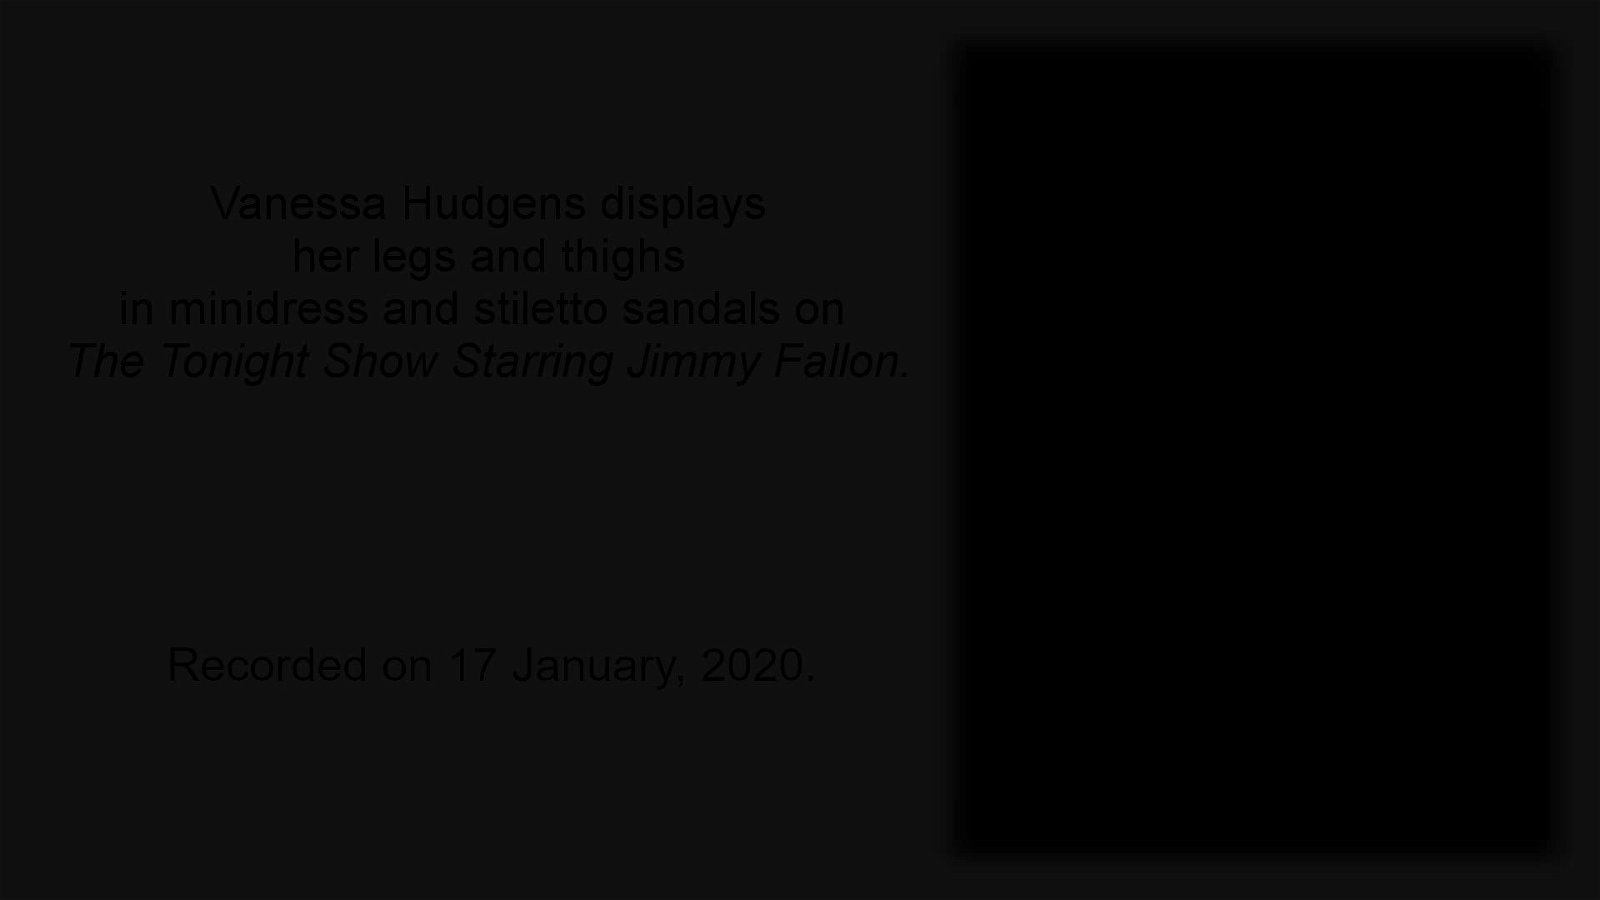 Video by tv.perception with the username @tv.perception,  April 5, 2023 at 3:29 AM. The post is about the topic Celebrity Feet and Legs and the text says 'Vanessa Hudgens displays her legs and thighs in minidress and stiletto sandals on "The Tonight Show Starring Jimmy Fallon."

Recorded on 17 January, 2020.

#VanessaHudgens #Celeb #Legs'